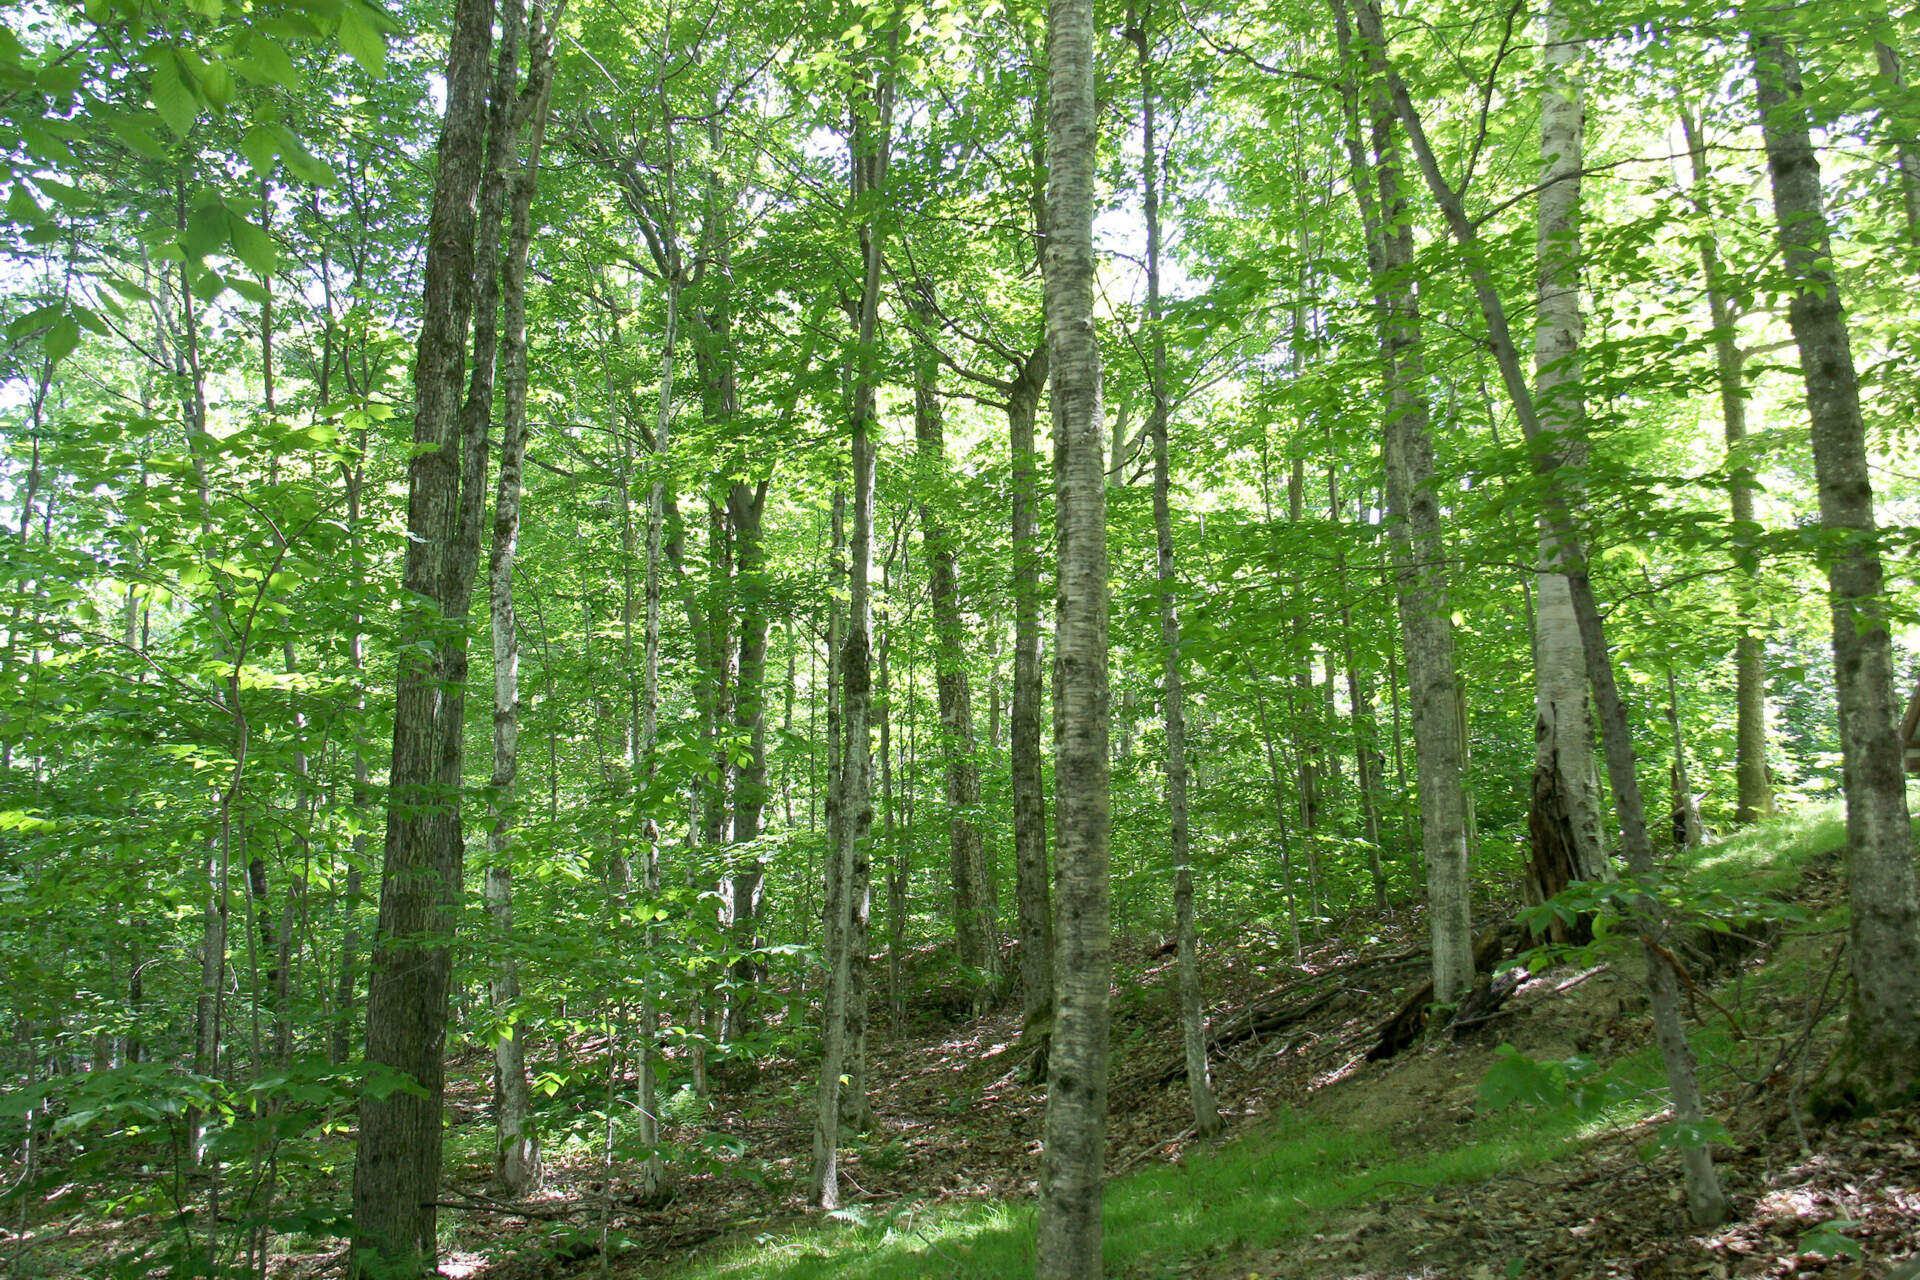 A forested area near the entrance of Underhill State Park on June 13. (Sophie Stevens/Vermont Public)